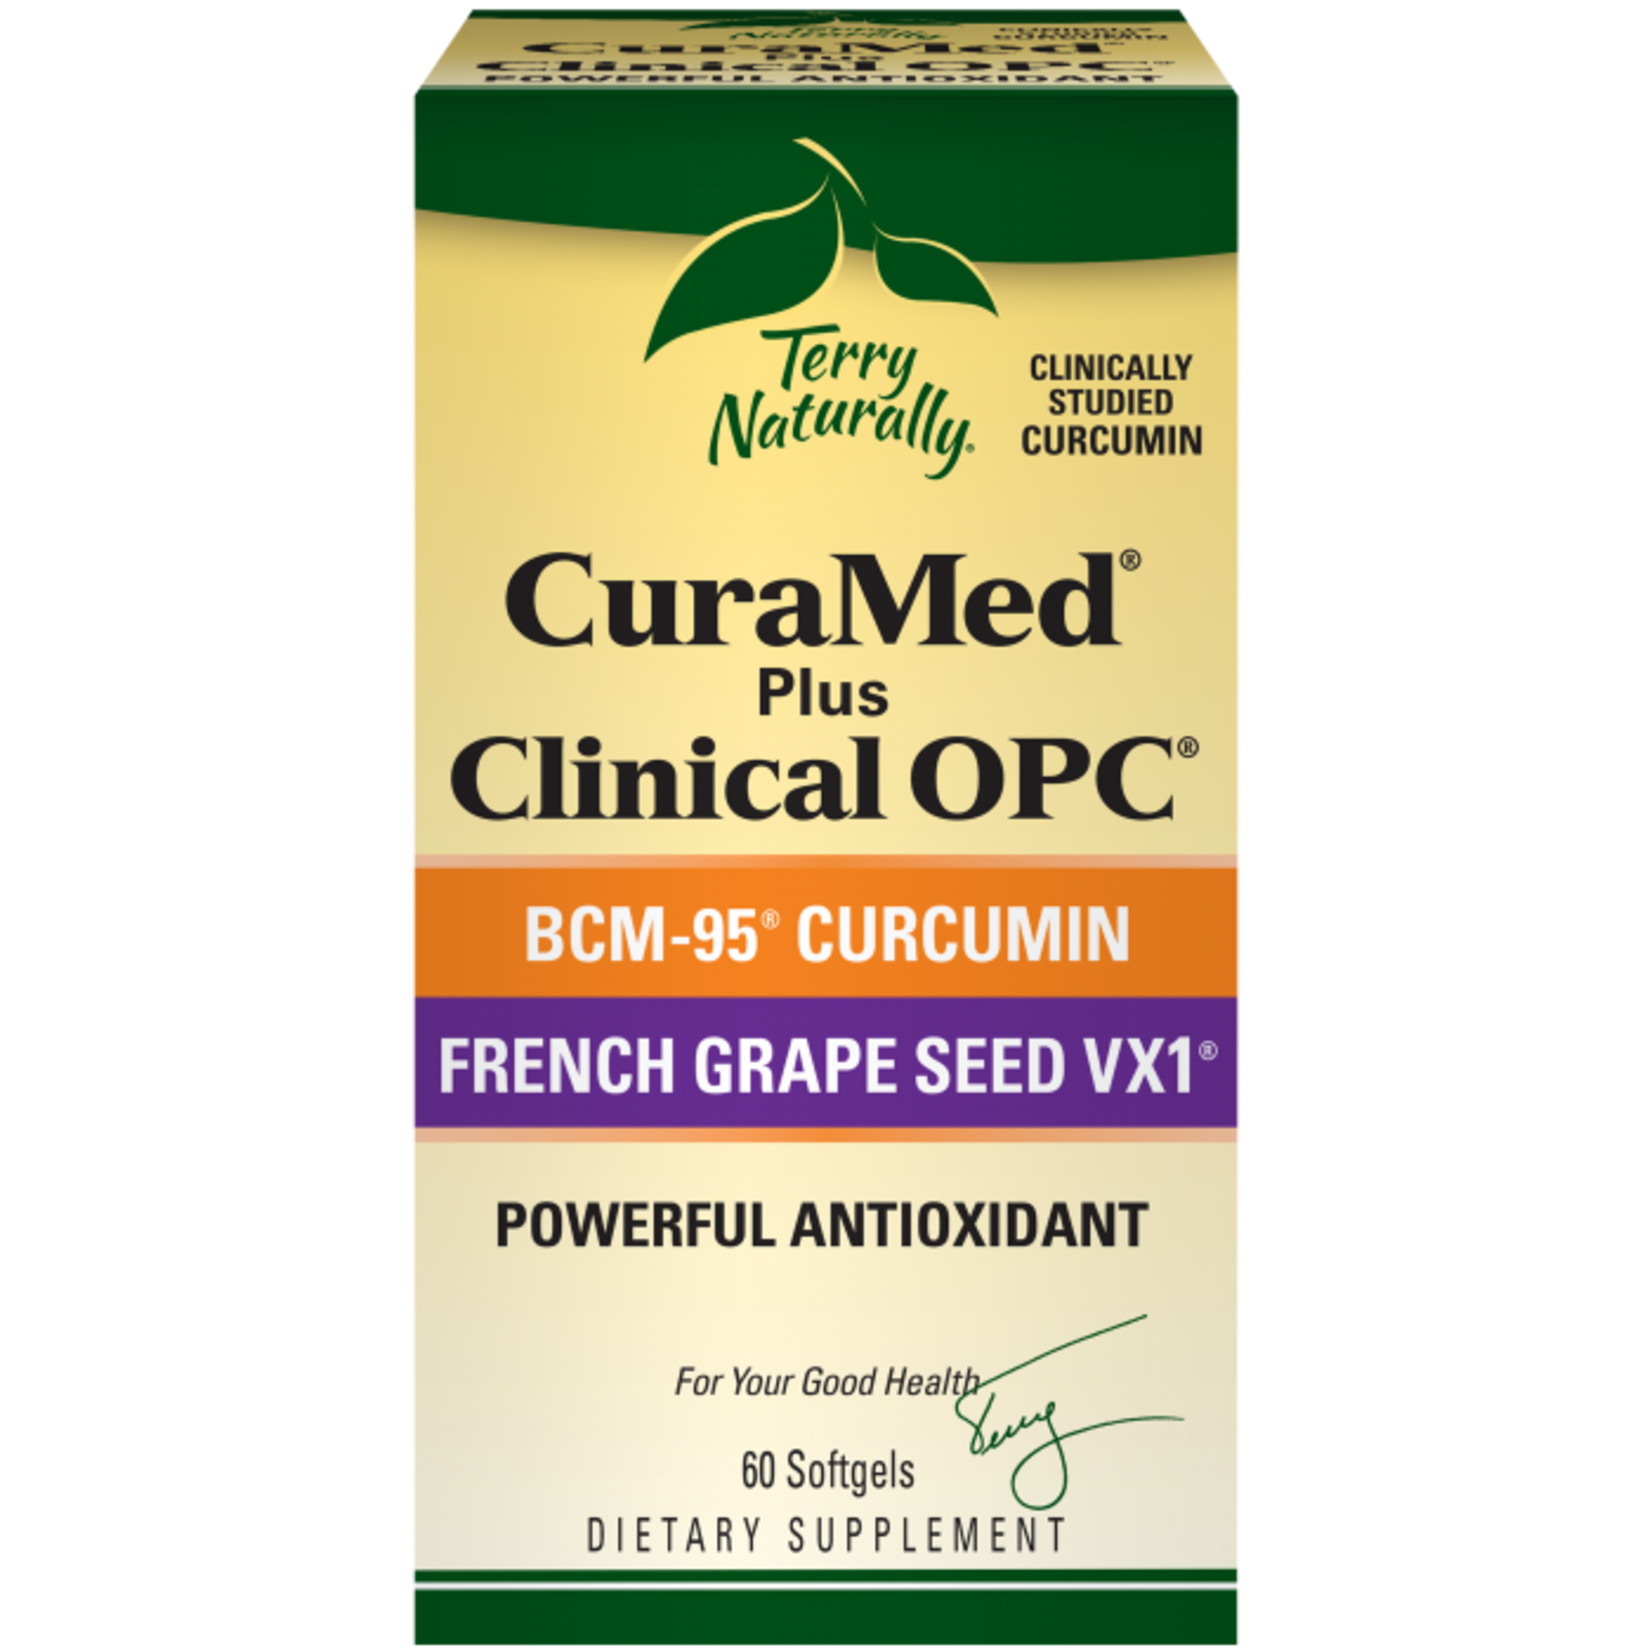 Terry Naturally Terry Naturally - Curamed + OPC - 60 Softgels